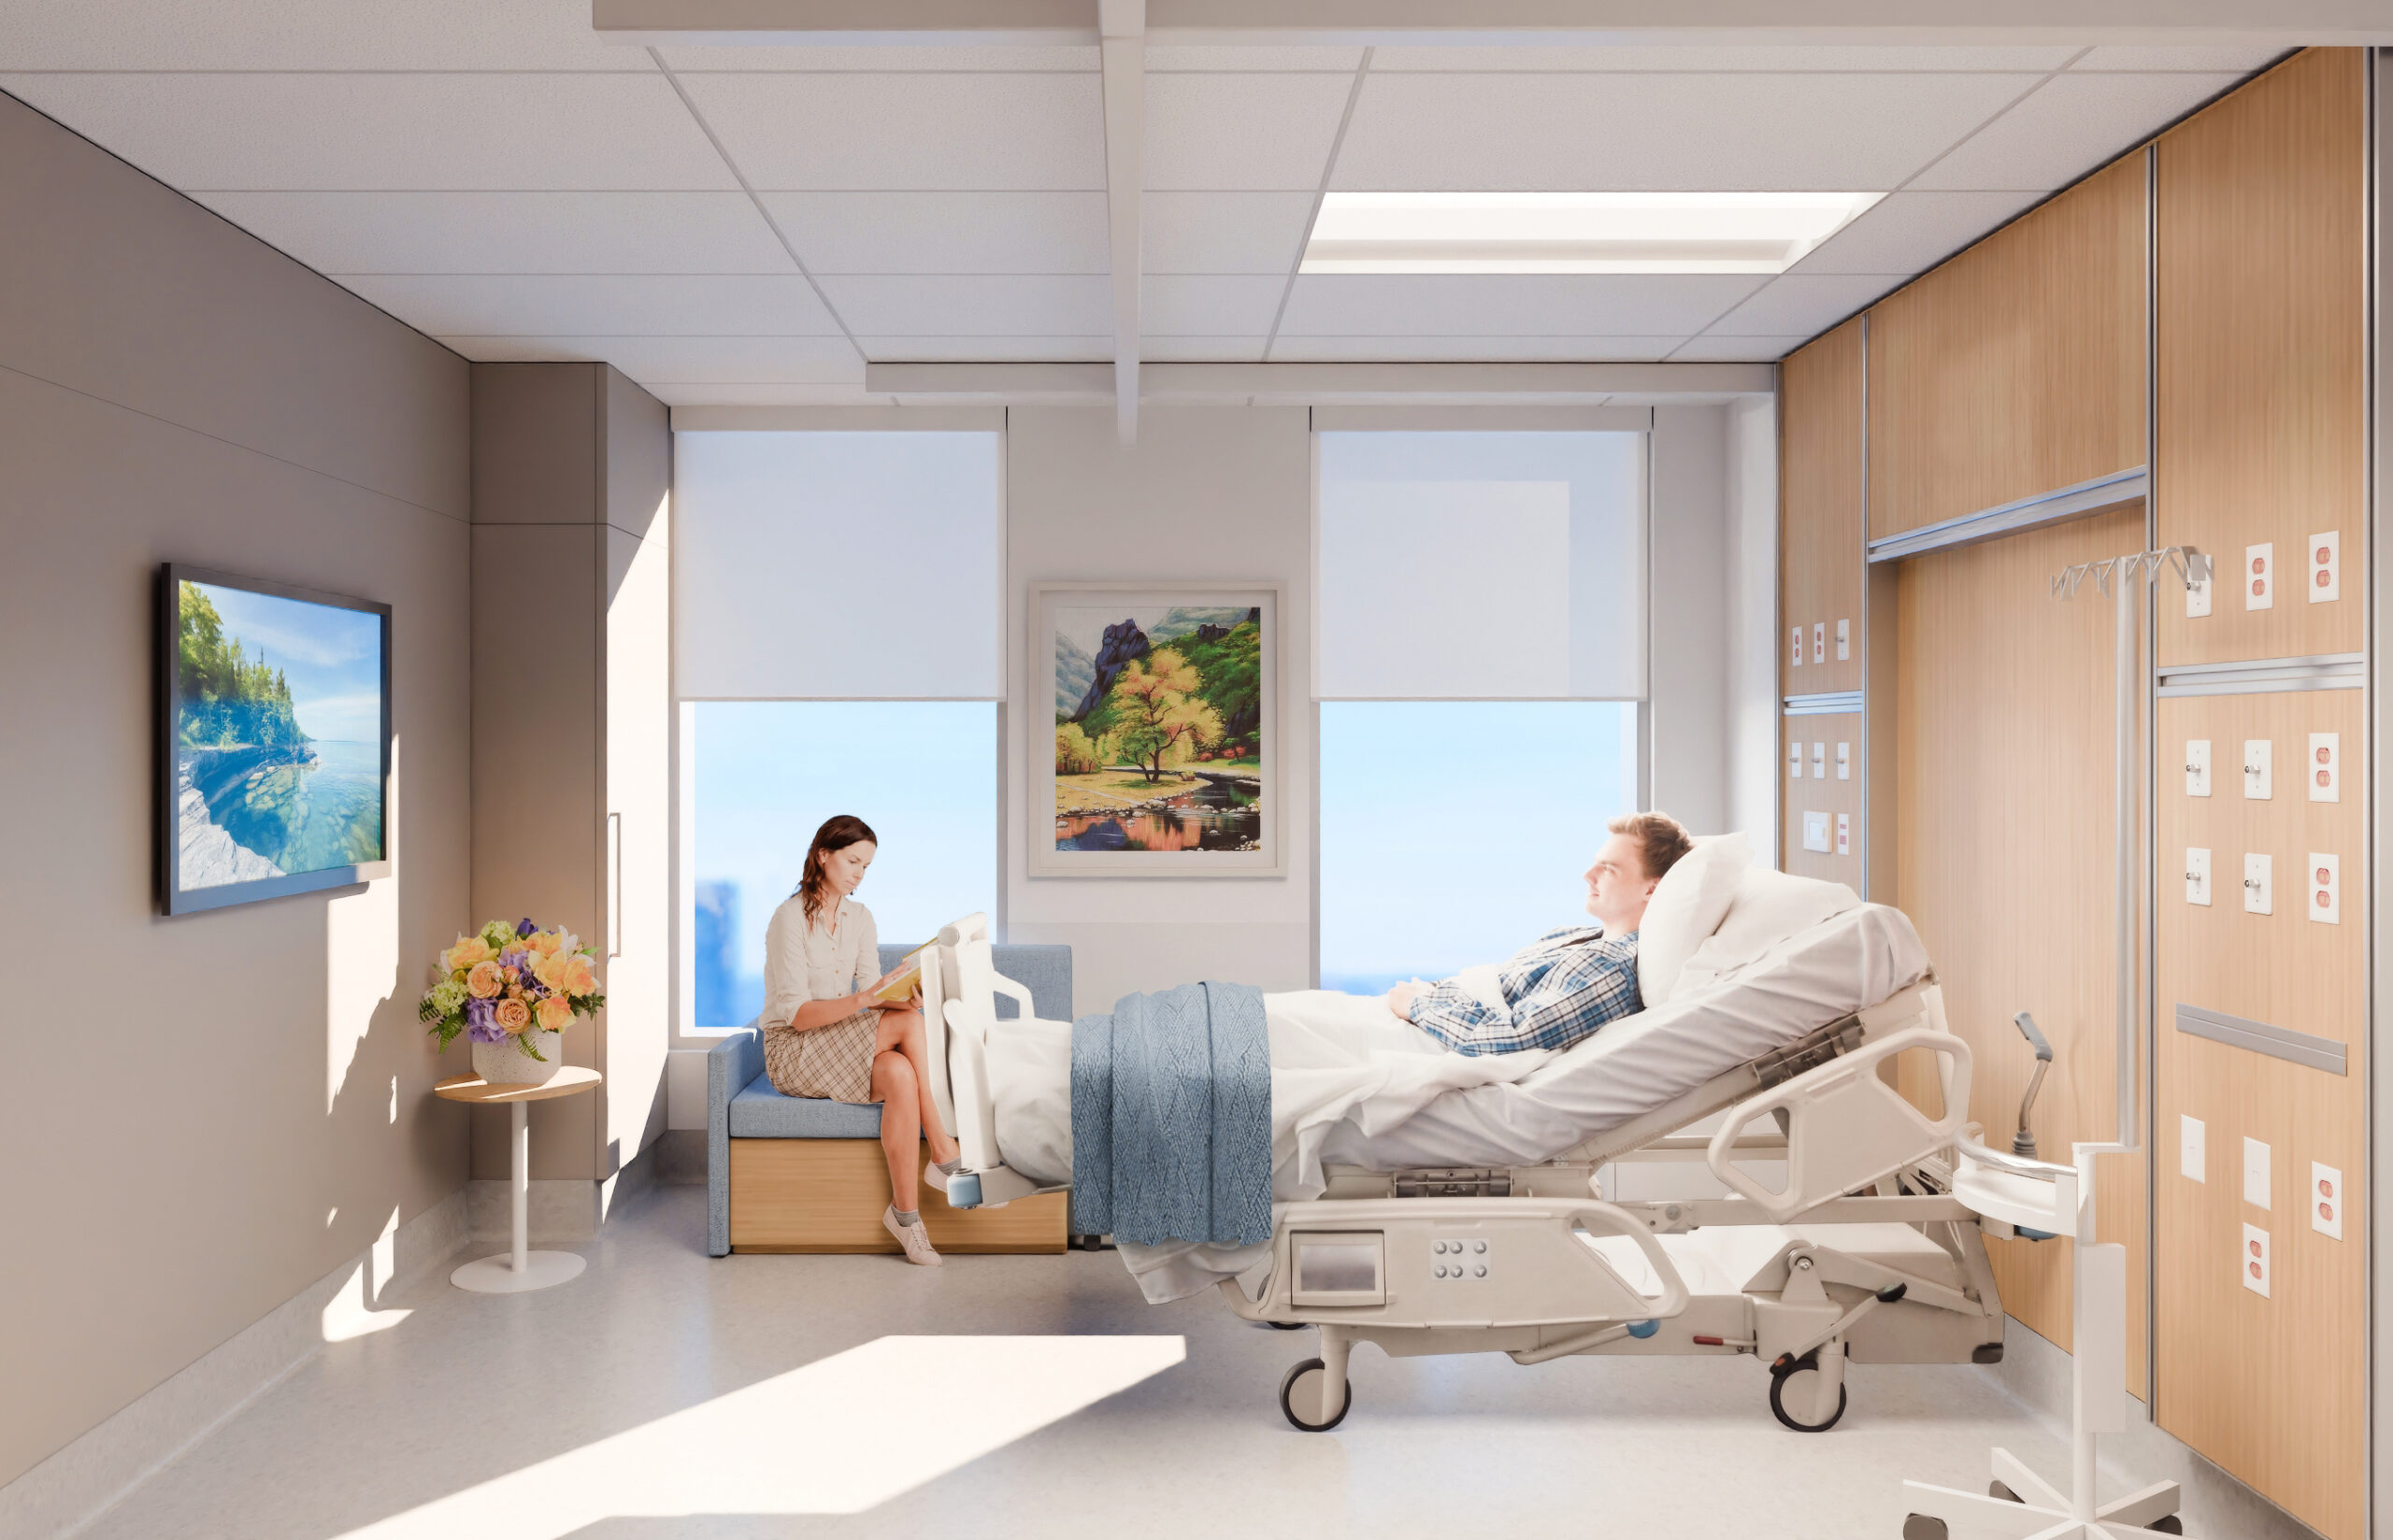 Surgical Tower hospital room with a bed and chairs and art displaying on the wall.